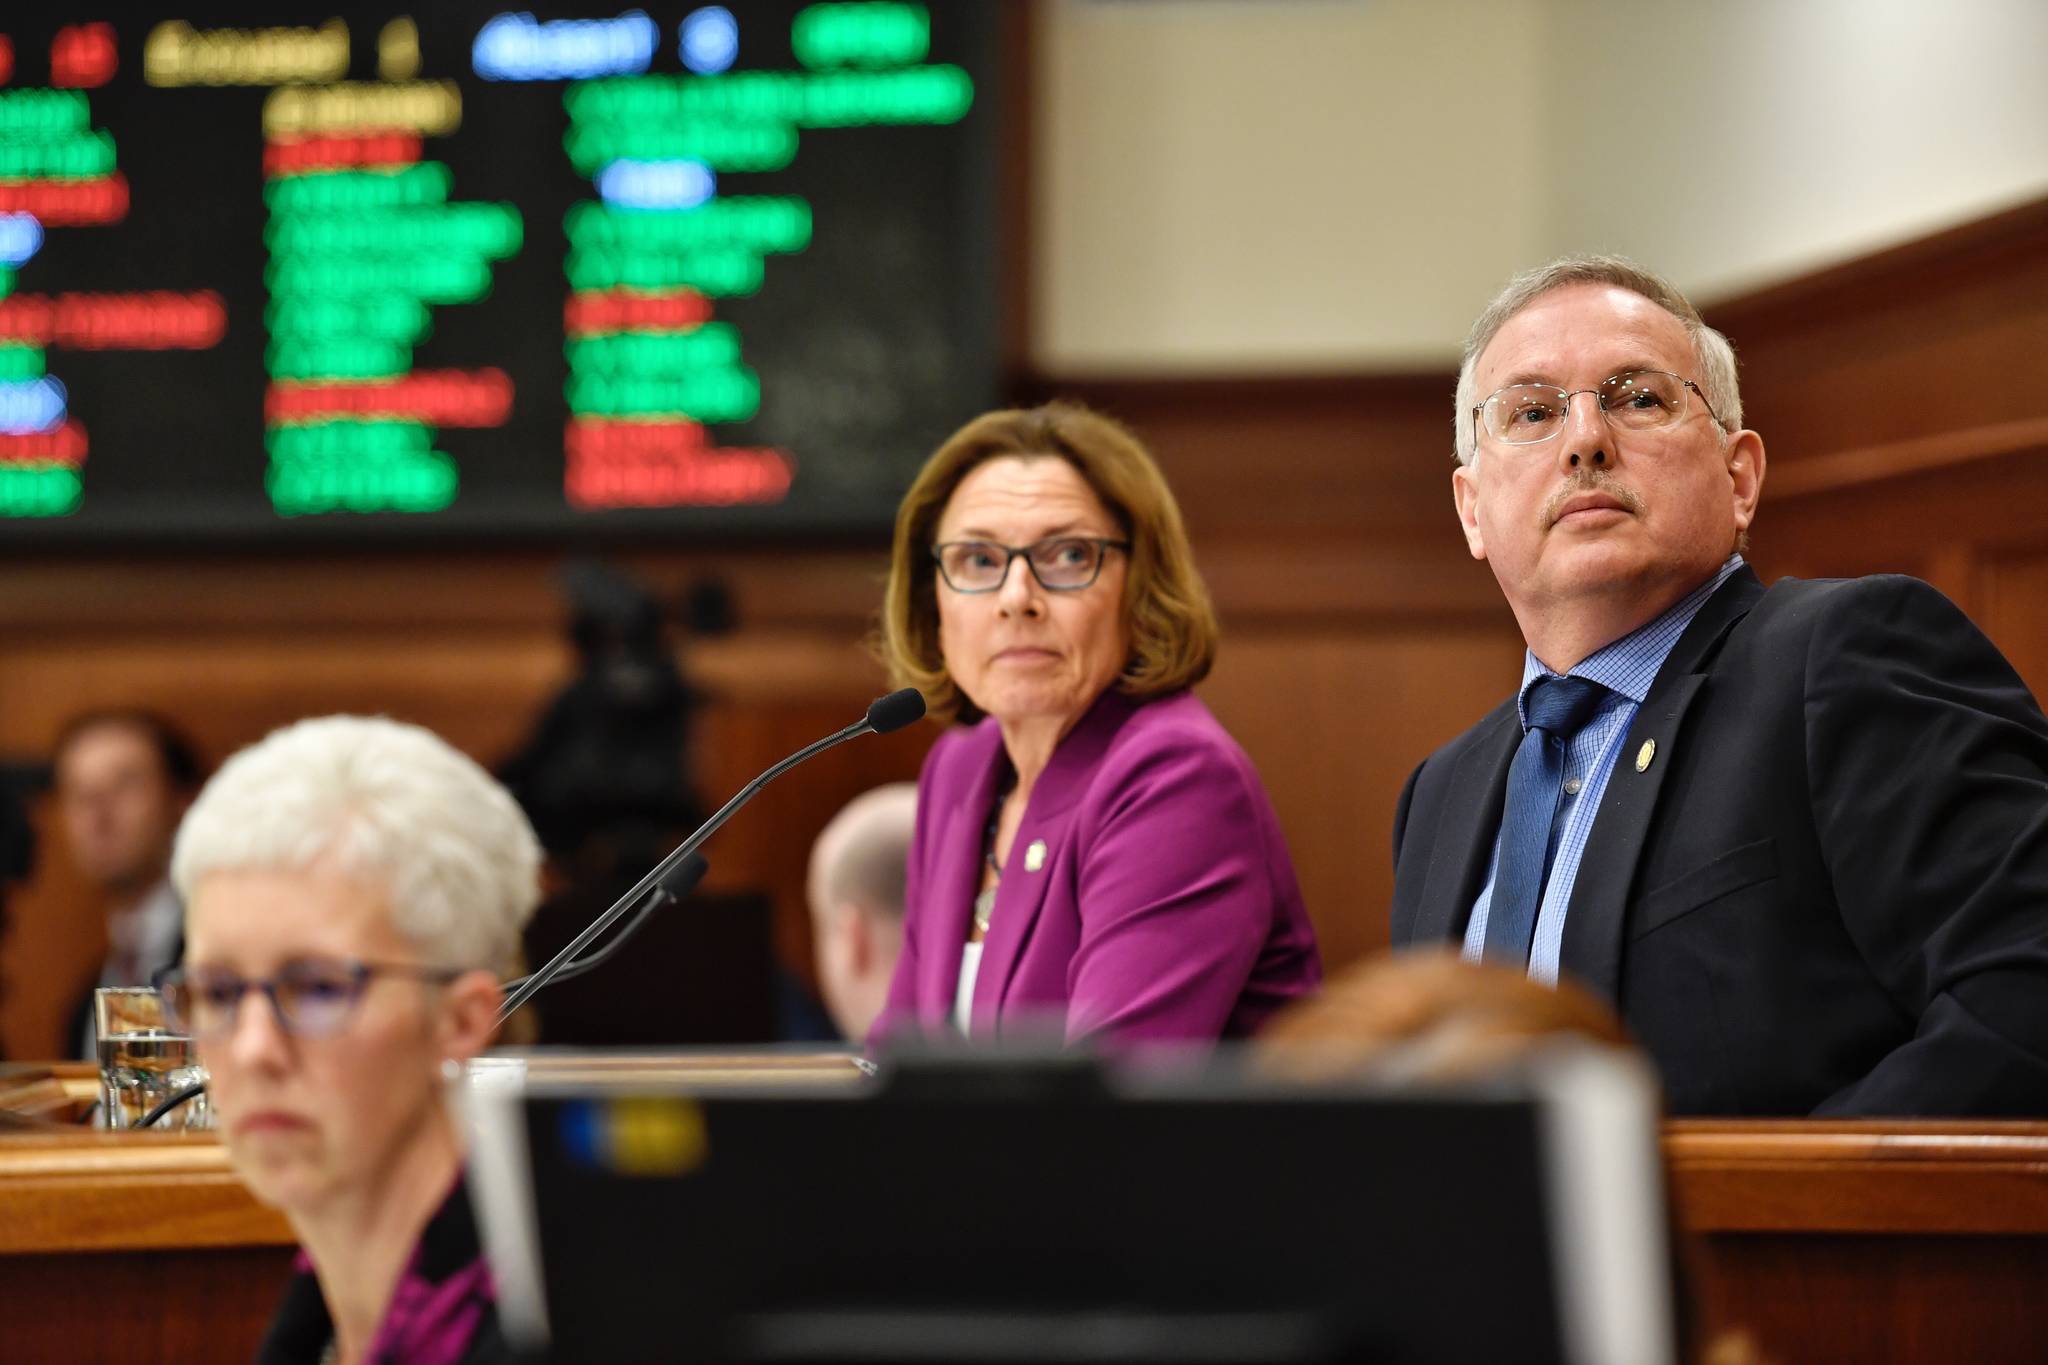 Speaker of the House Bryce Edgmon, D-Dillingham, and Senate President Cathy Giessel, R-Anchorage, watch the votes tally for Amanda Price for commissioner of the Department of Public Safety during confirmation voting during a joint session of the Alaska Legislature at the Capitol on Wednesday, April 17, 2019. (Michael Penn | Juneau Empire)